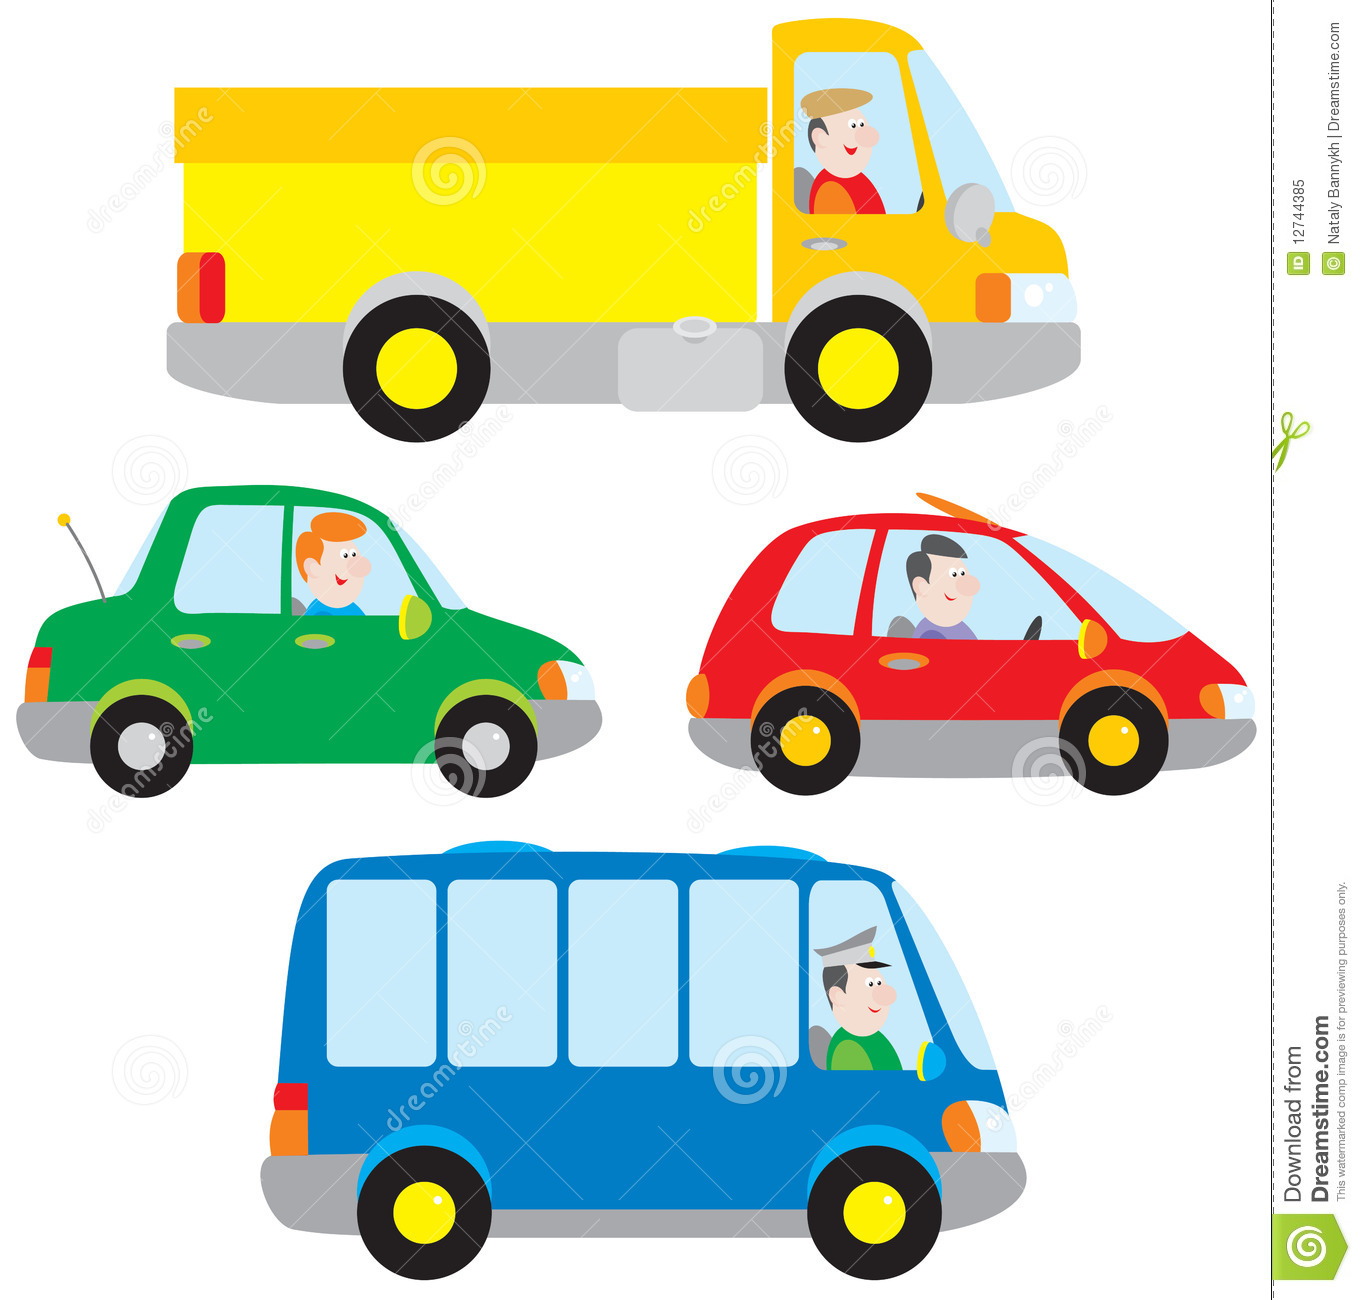 free clipart images cars - photo #37